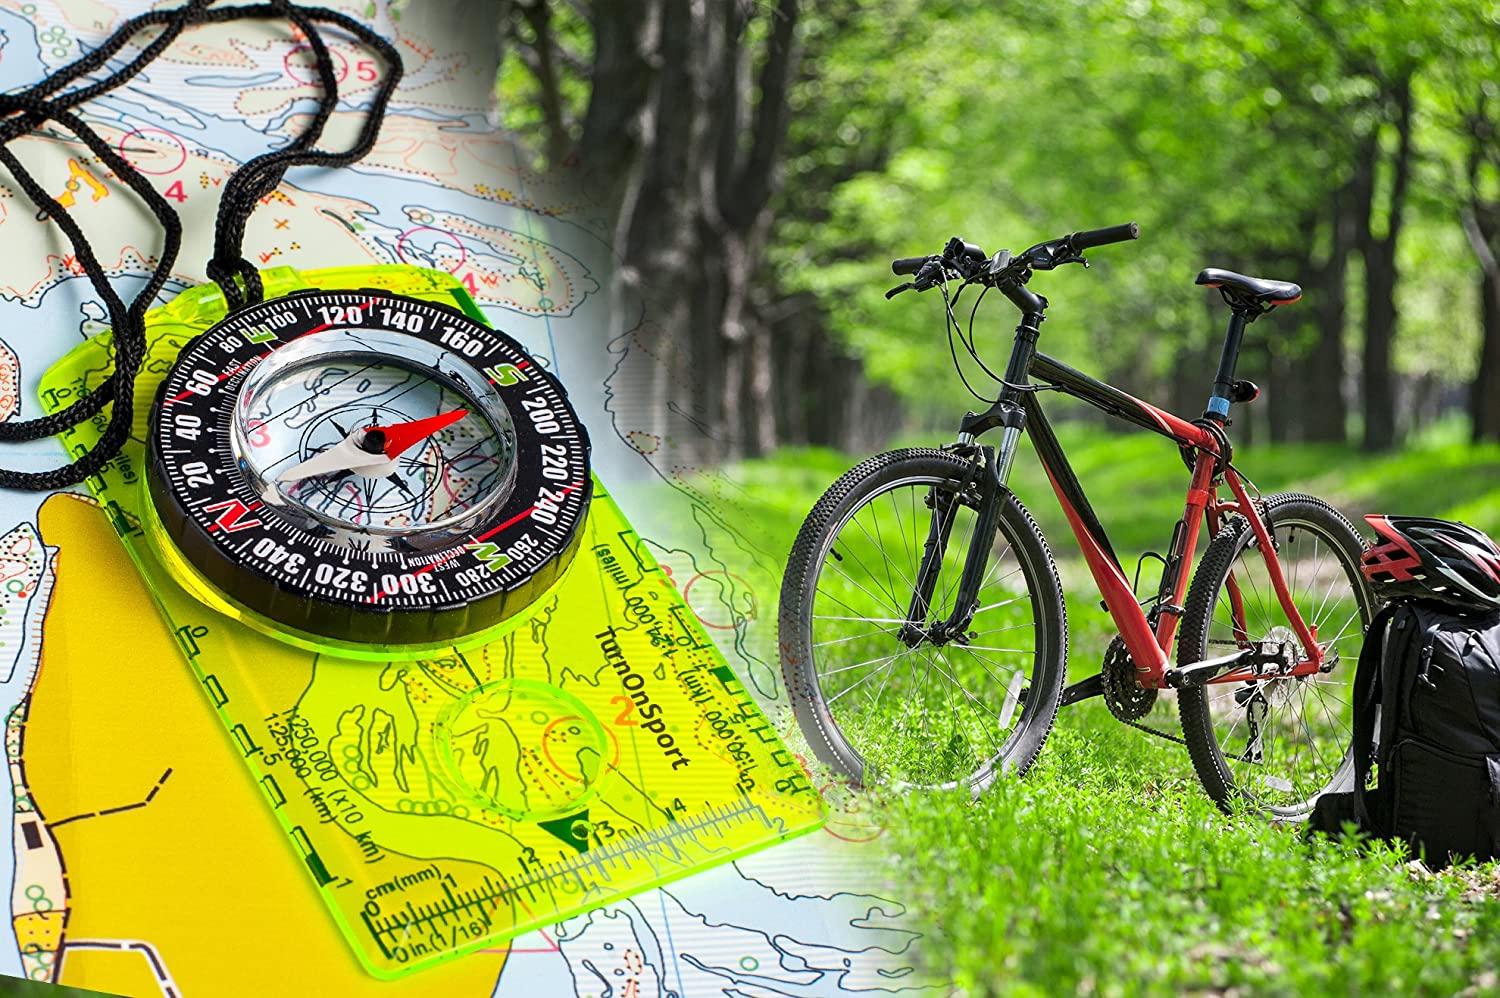  Orienteering Compass Hiking Backpacking Compass, Advanced  Scout Compass Camping Navigation - Boy Scout Compass for Kids